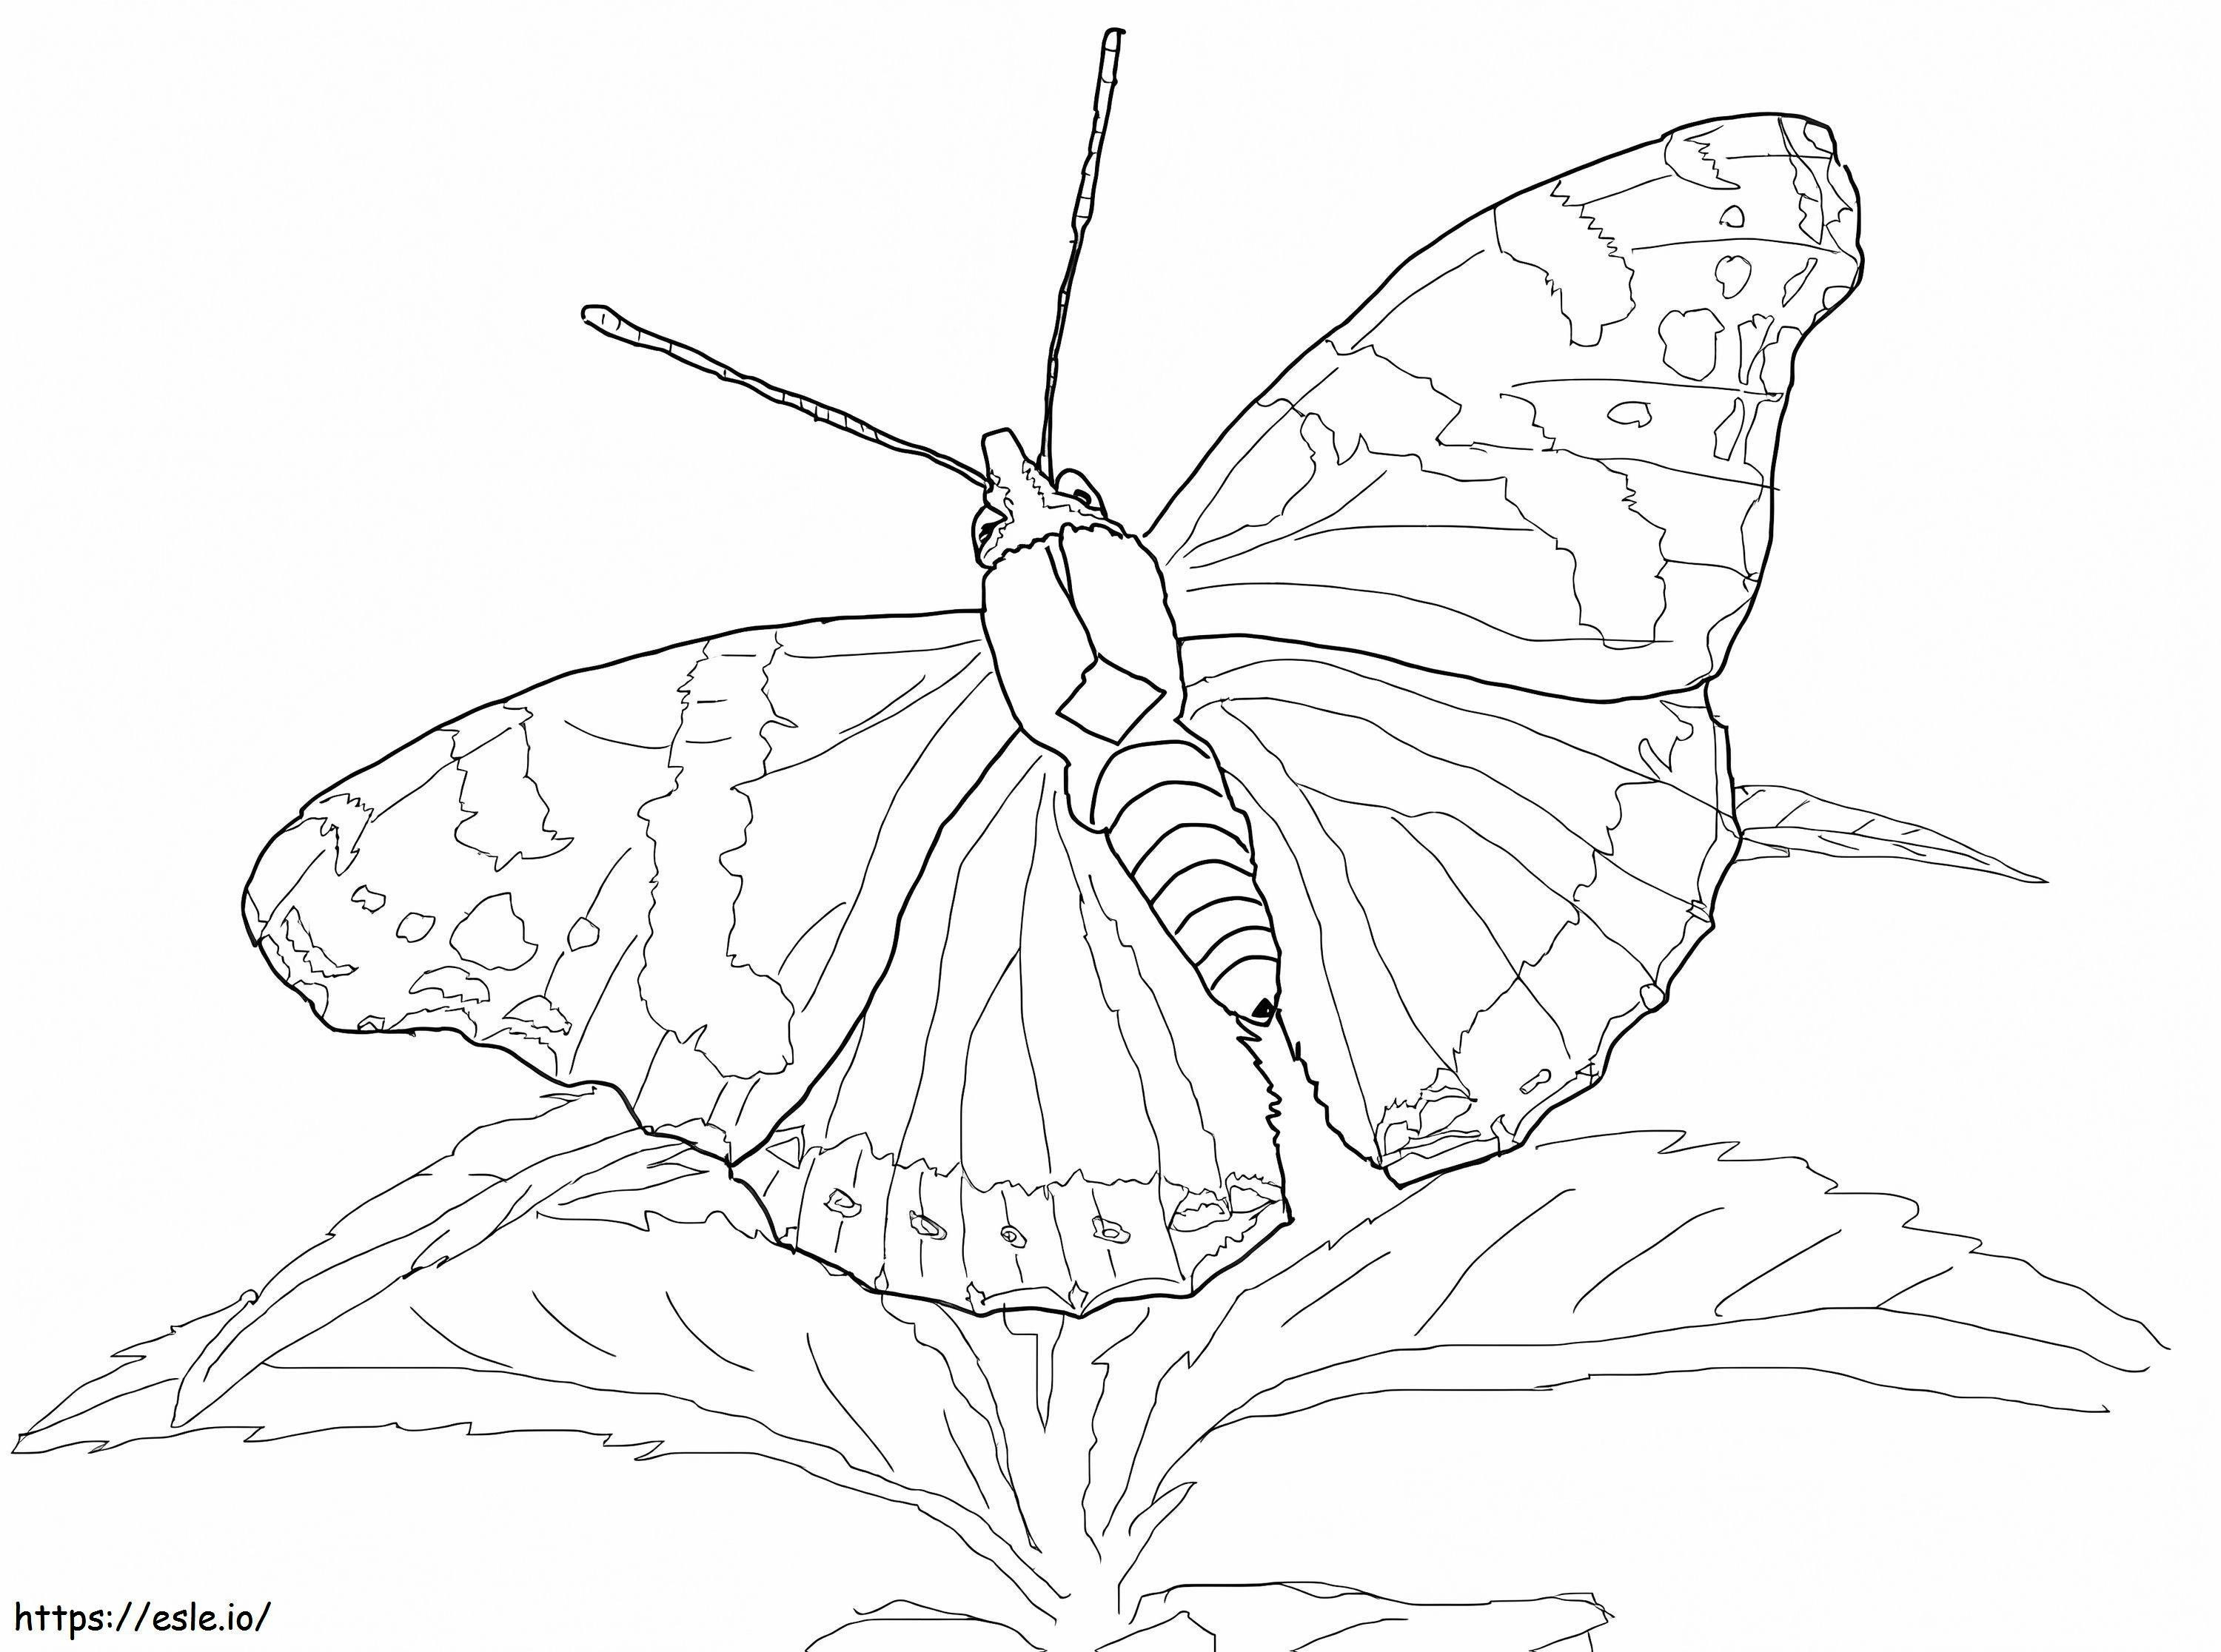 Red Admiral Butterfly coloring page